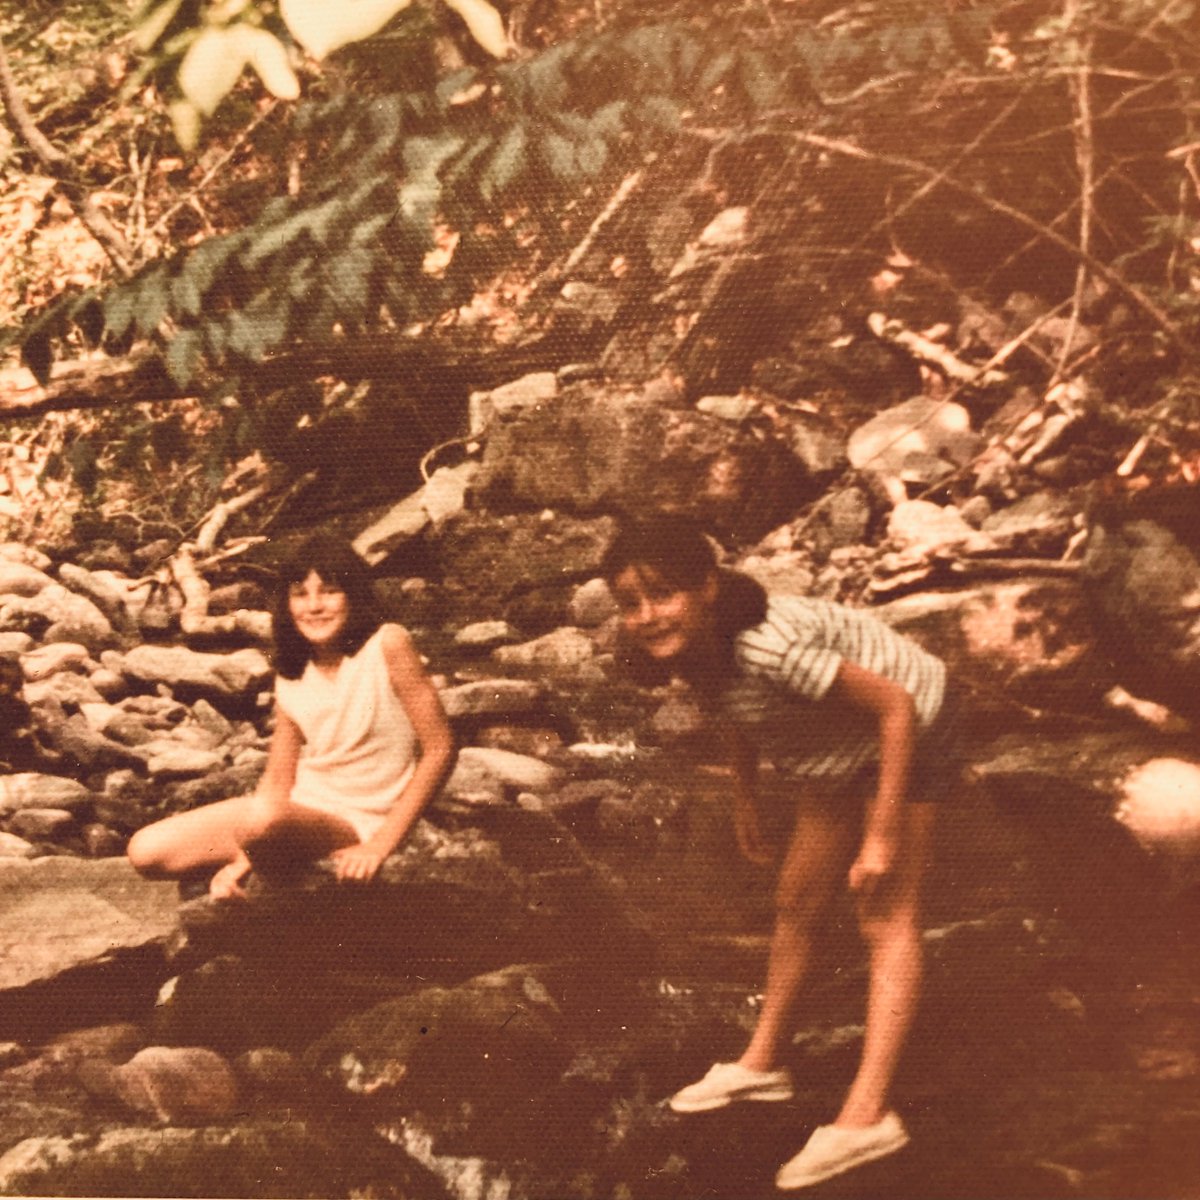 My sister (sitting) and I playing near the Esopus Creek, NY 1973. #Catskills vibe for BIRDEYE @saltpublishing coming 15th May #BookTwitter